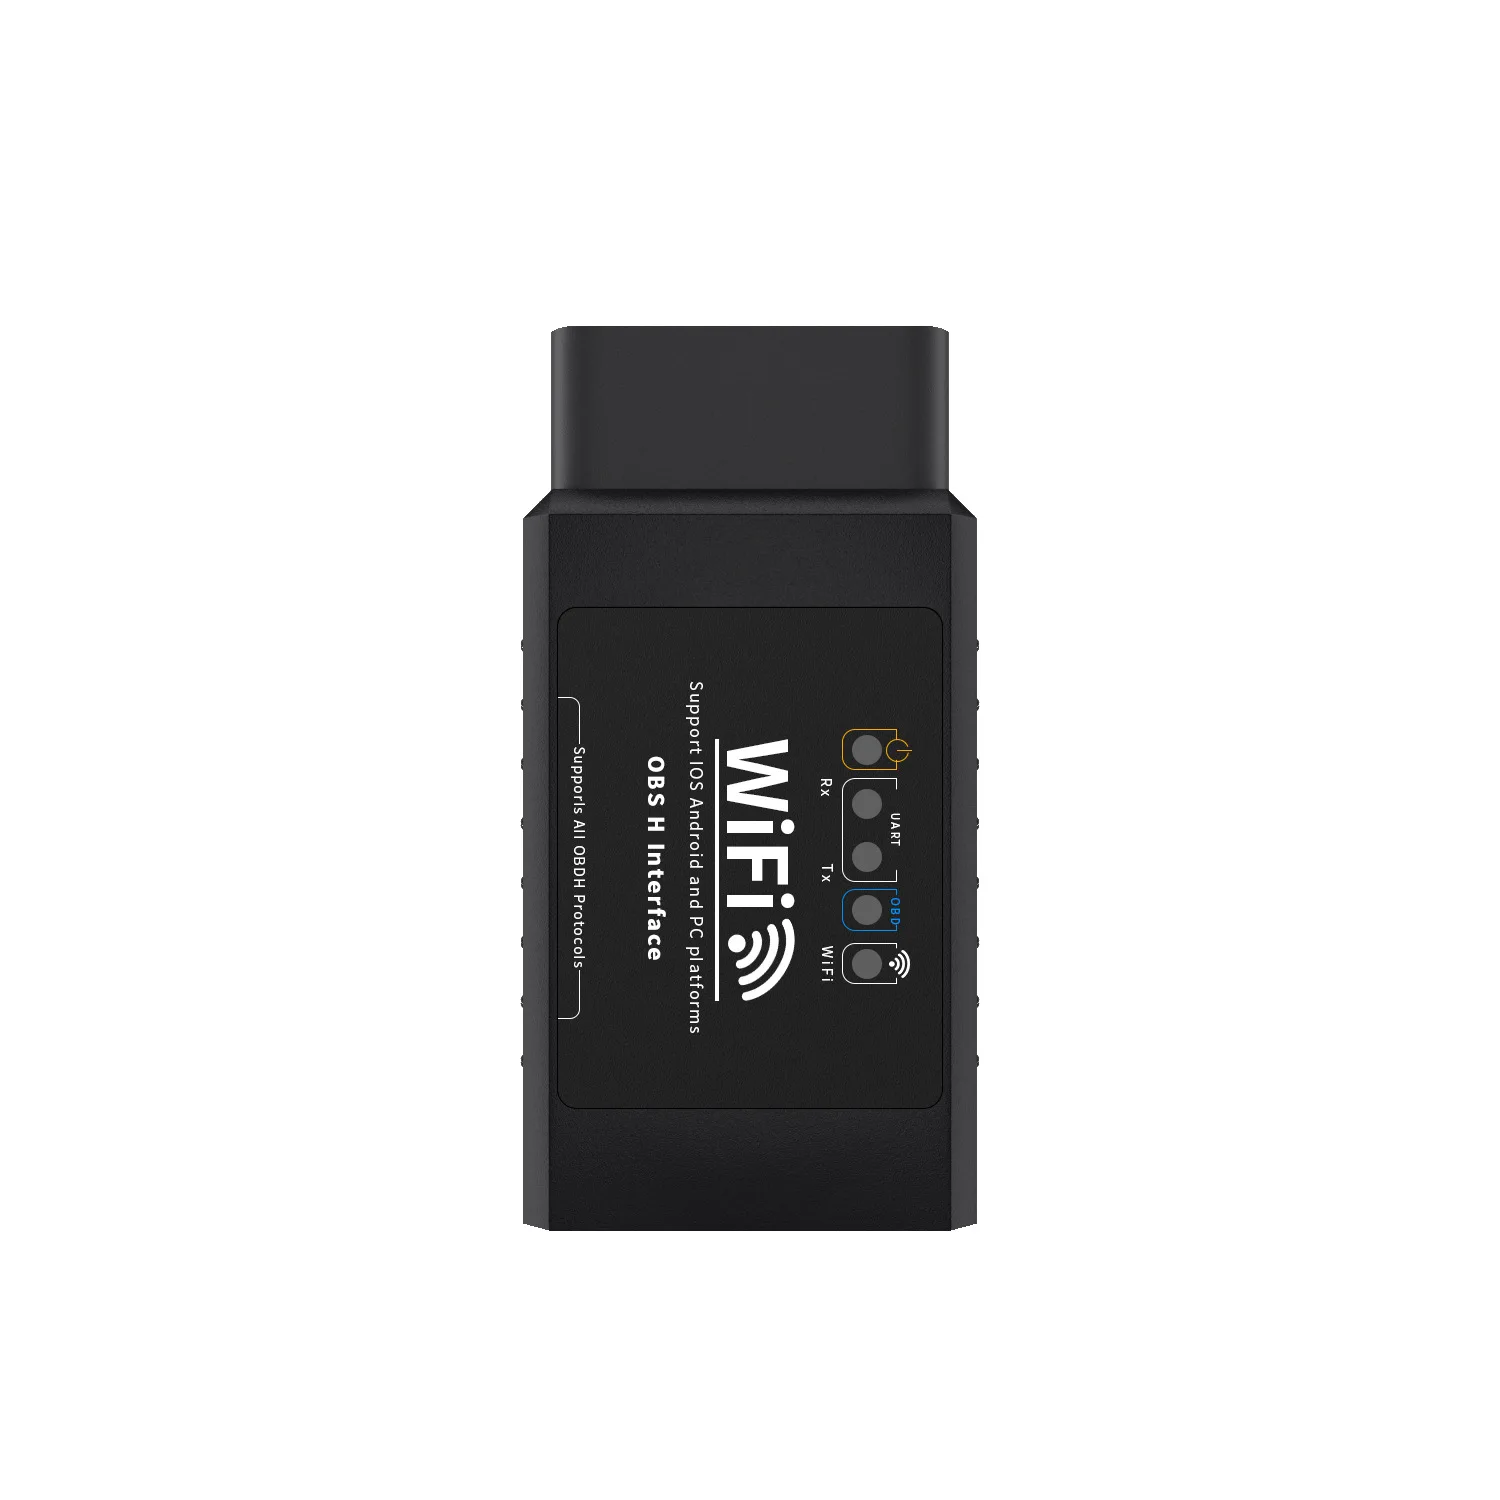 ELM327 WIFI V1.5 car fault detector supports Android and Apple OBD2